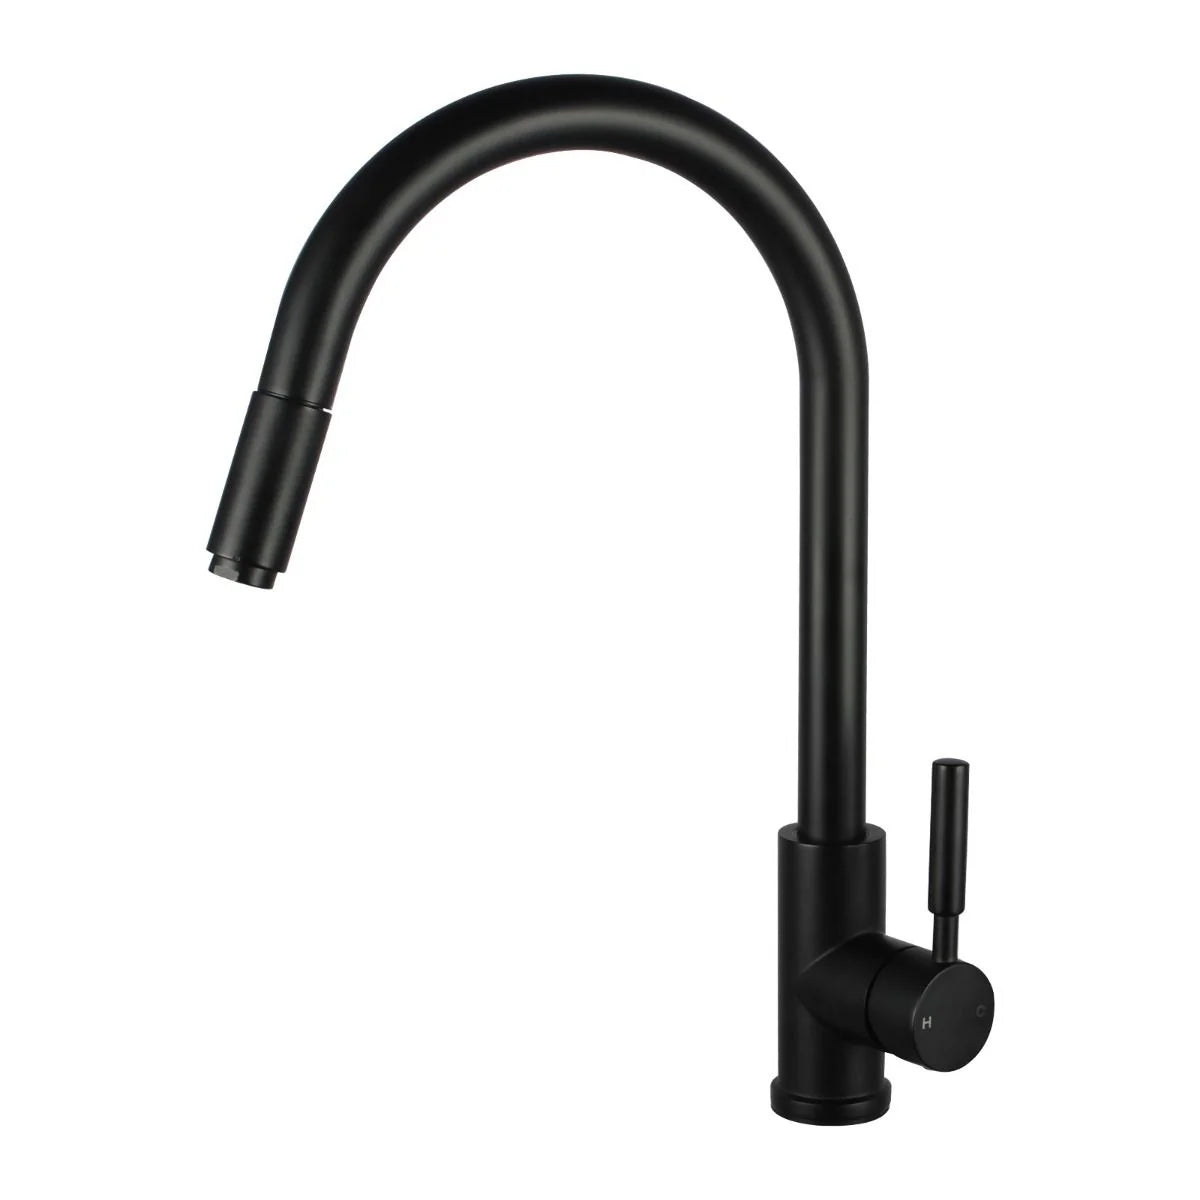 Round pull-out kitchen sink mixer tap with retractable nozzle - model 1016.KM-OX1016.KM